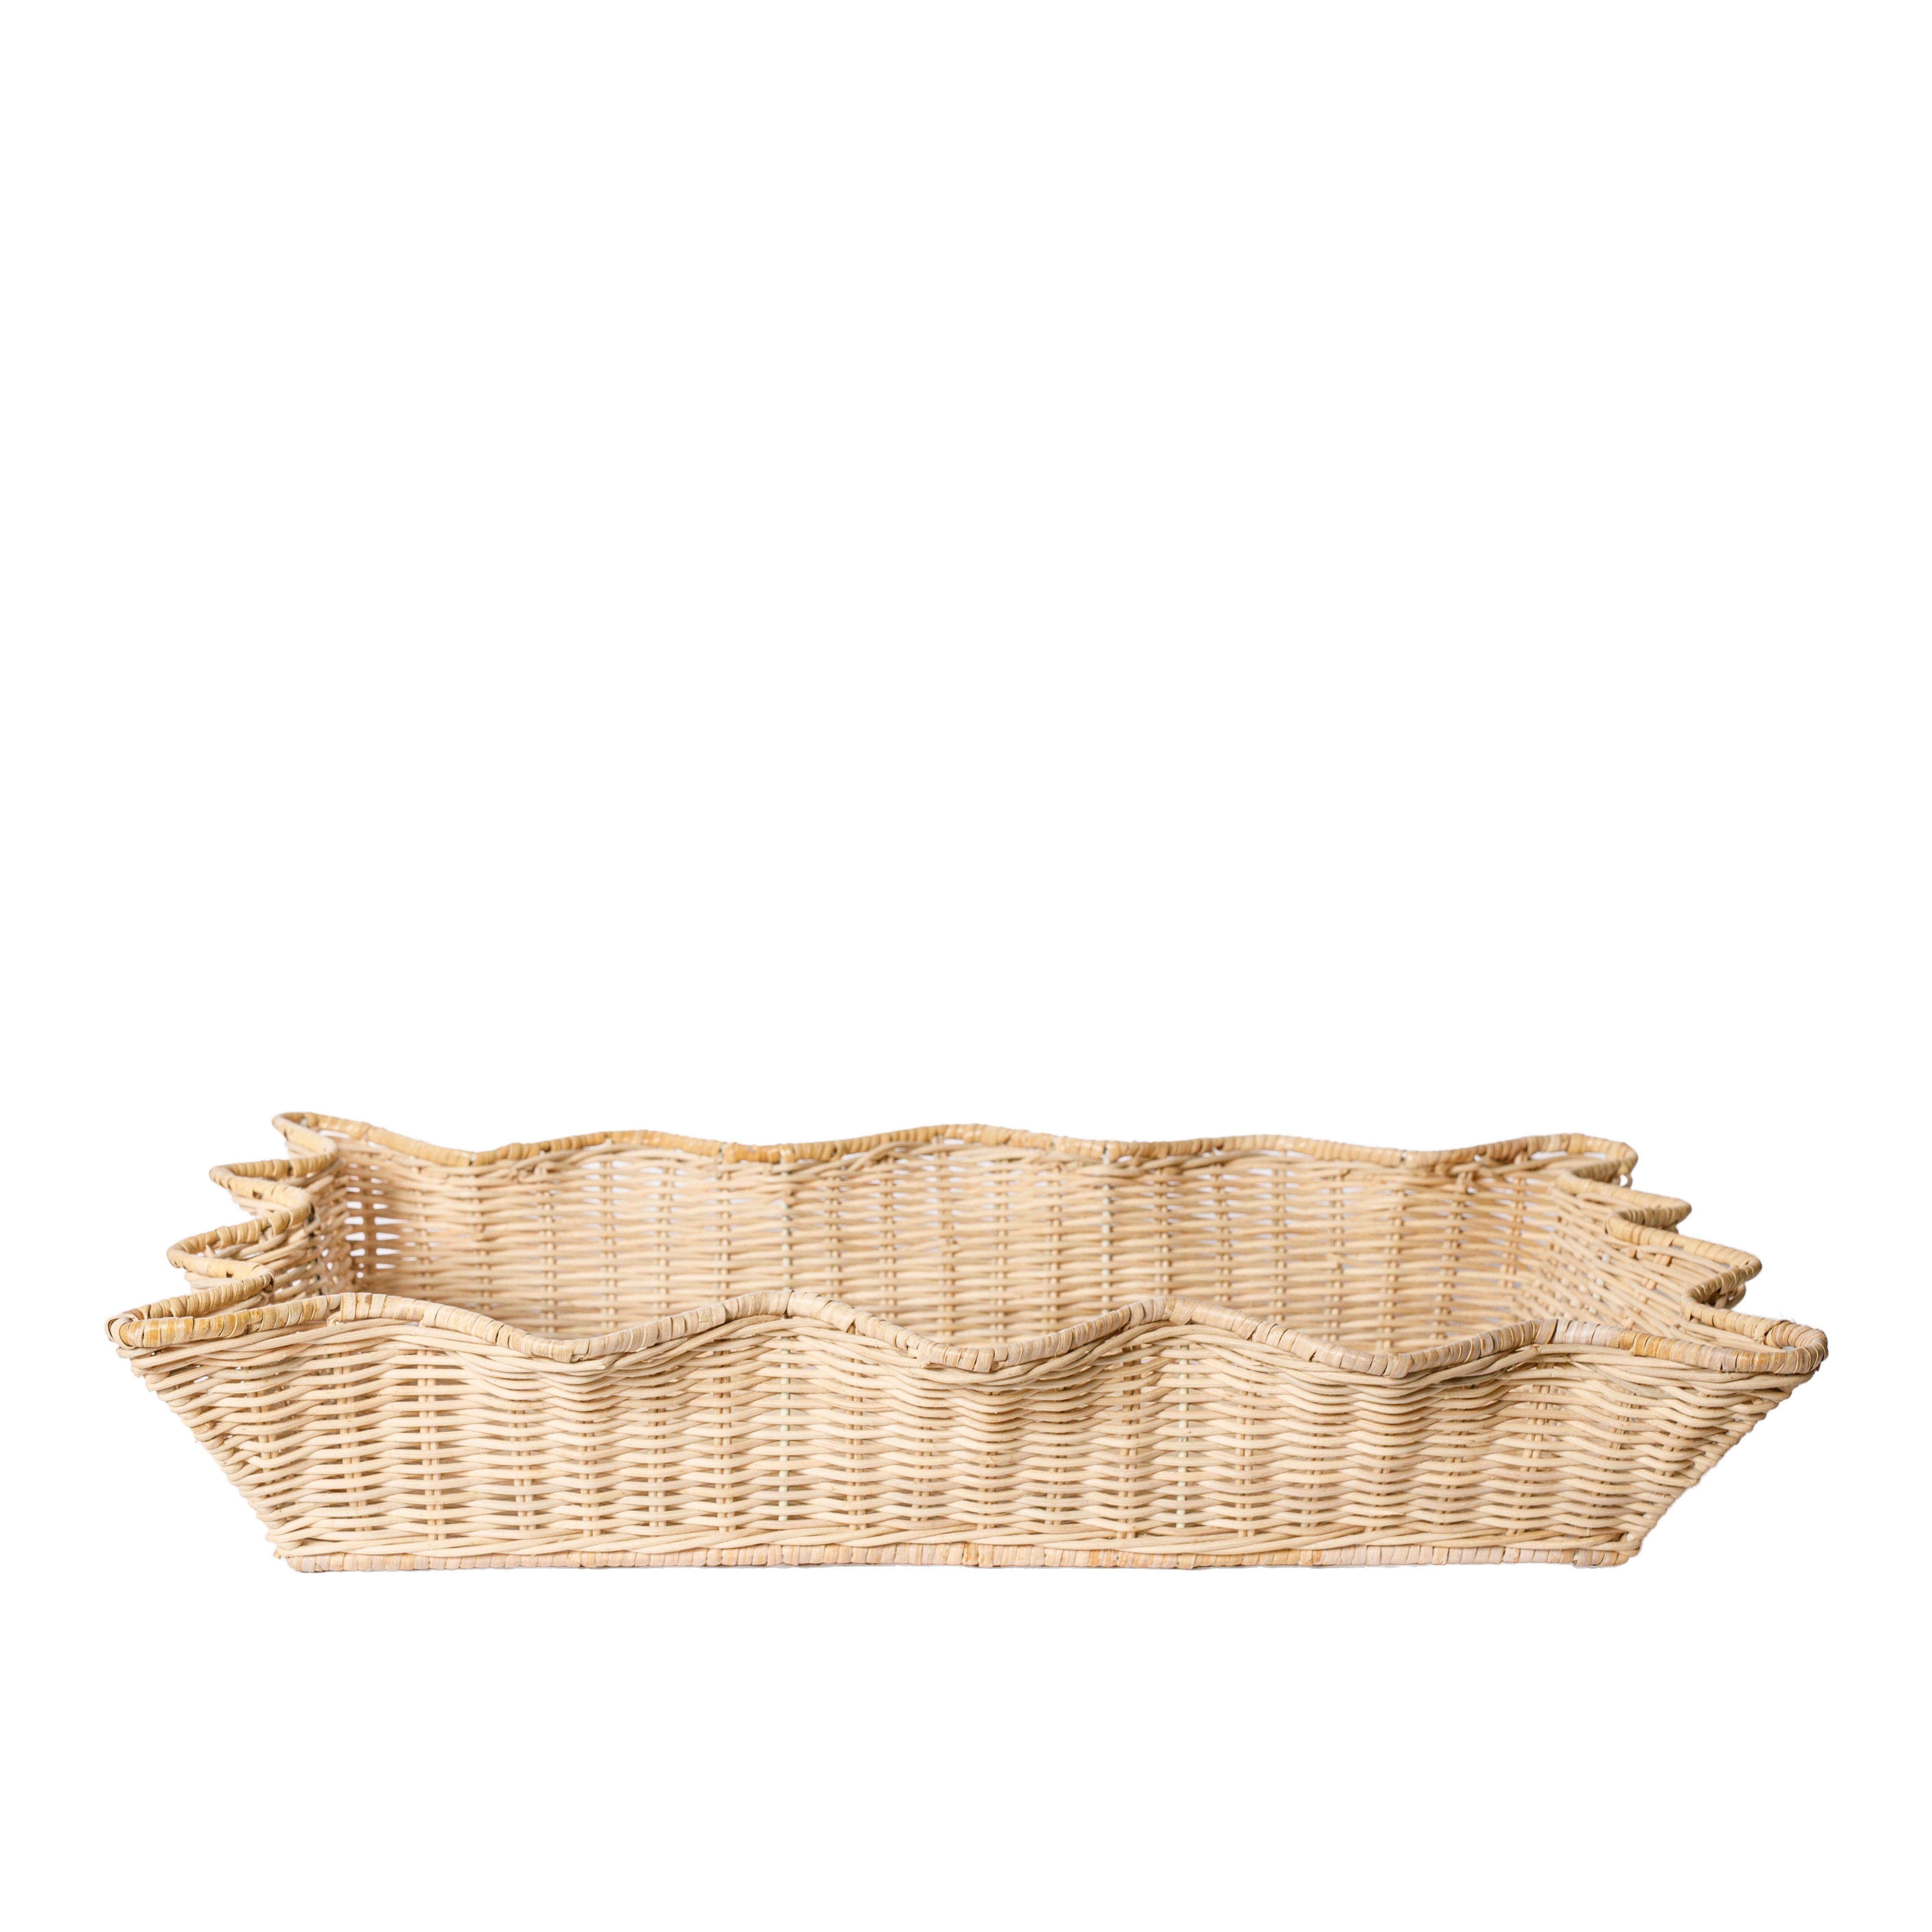 Wavy, Curved Edge Rattan Basket for Hire | Gold Coast Wedding & Event Hire